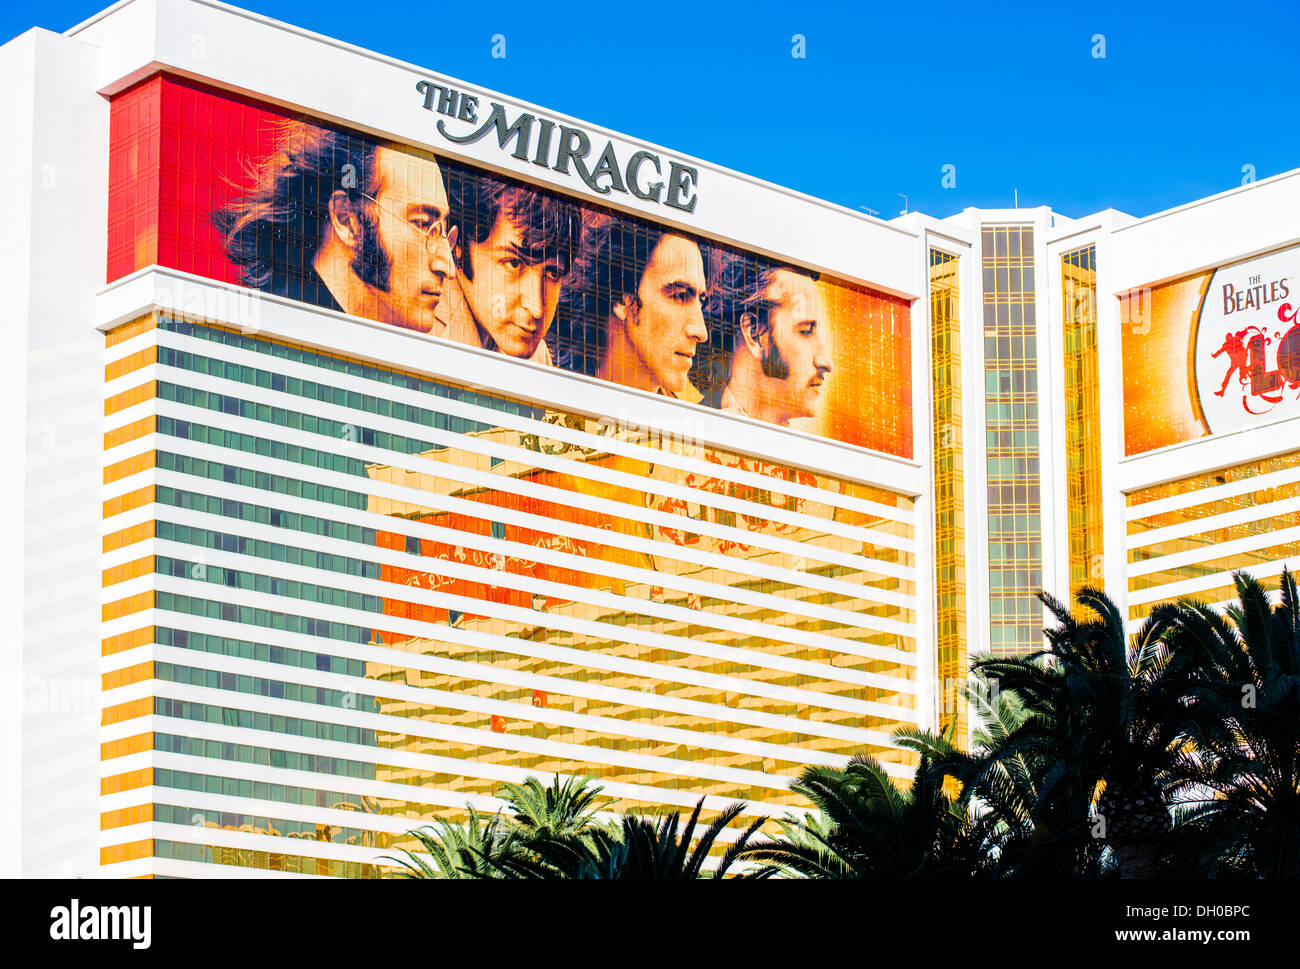 Beatles show by Cirque de Soleil at The Mirage hotel. The Beatles show Love is written and directed by Dominic Champagne. Stock Photo